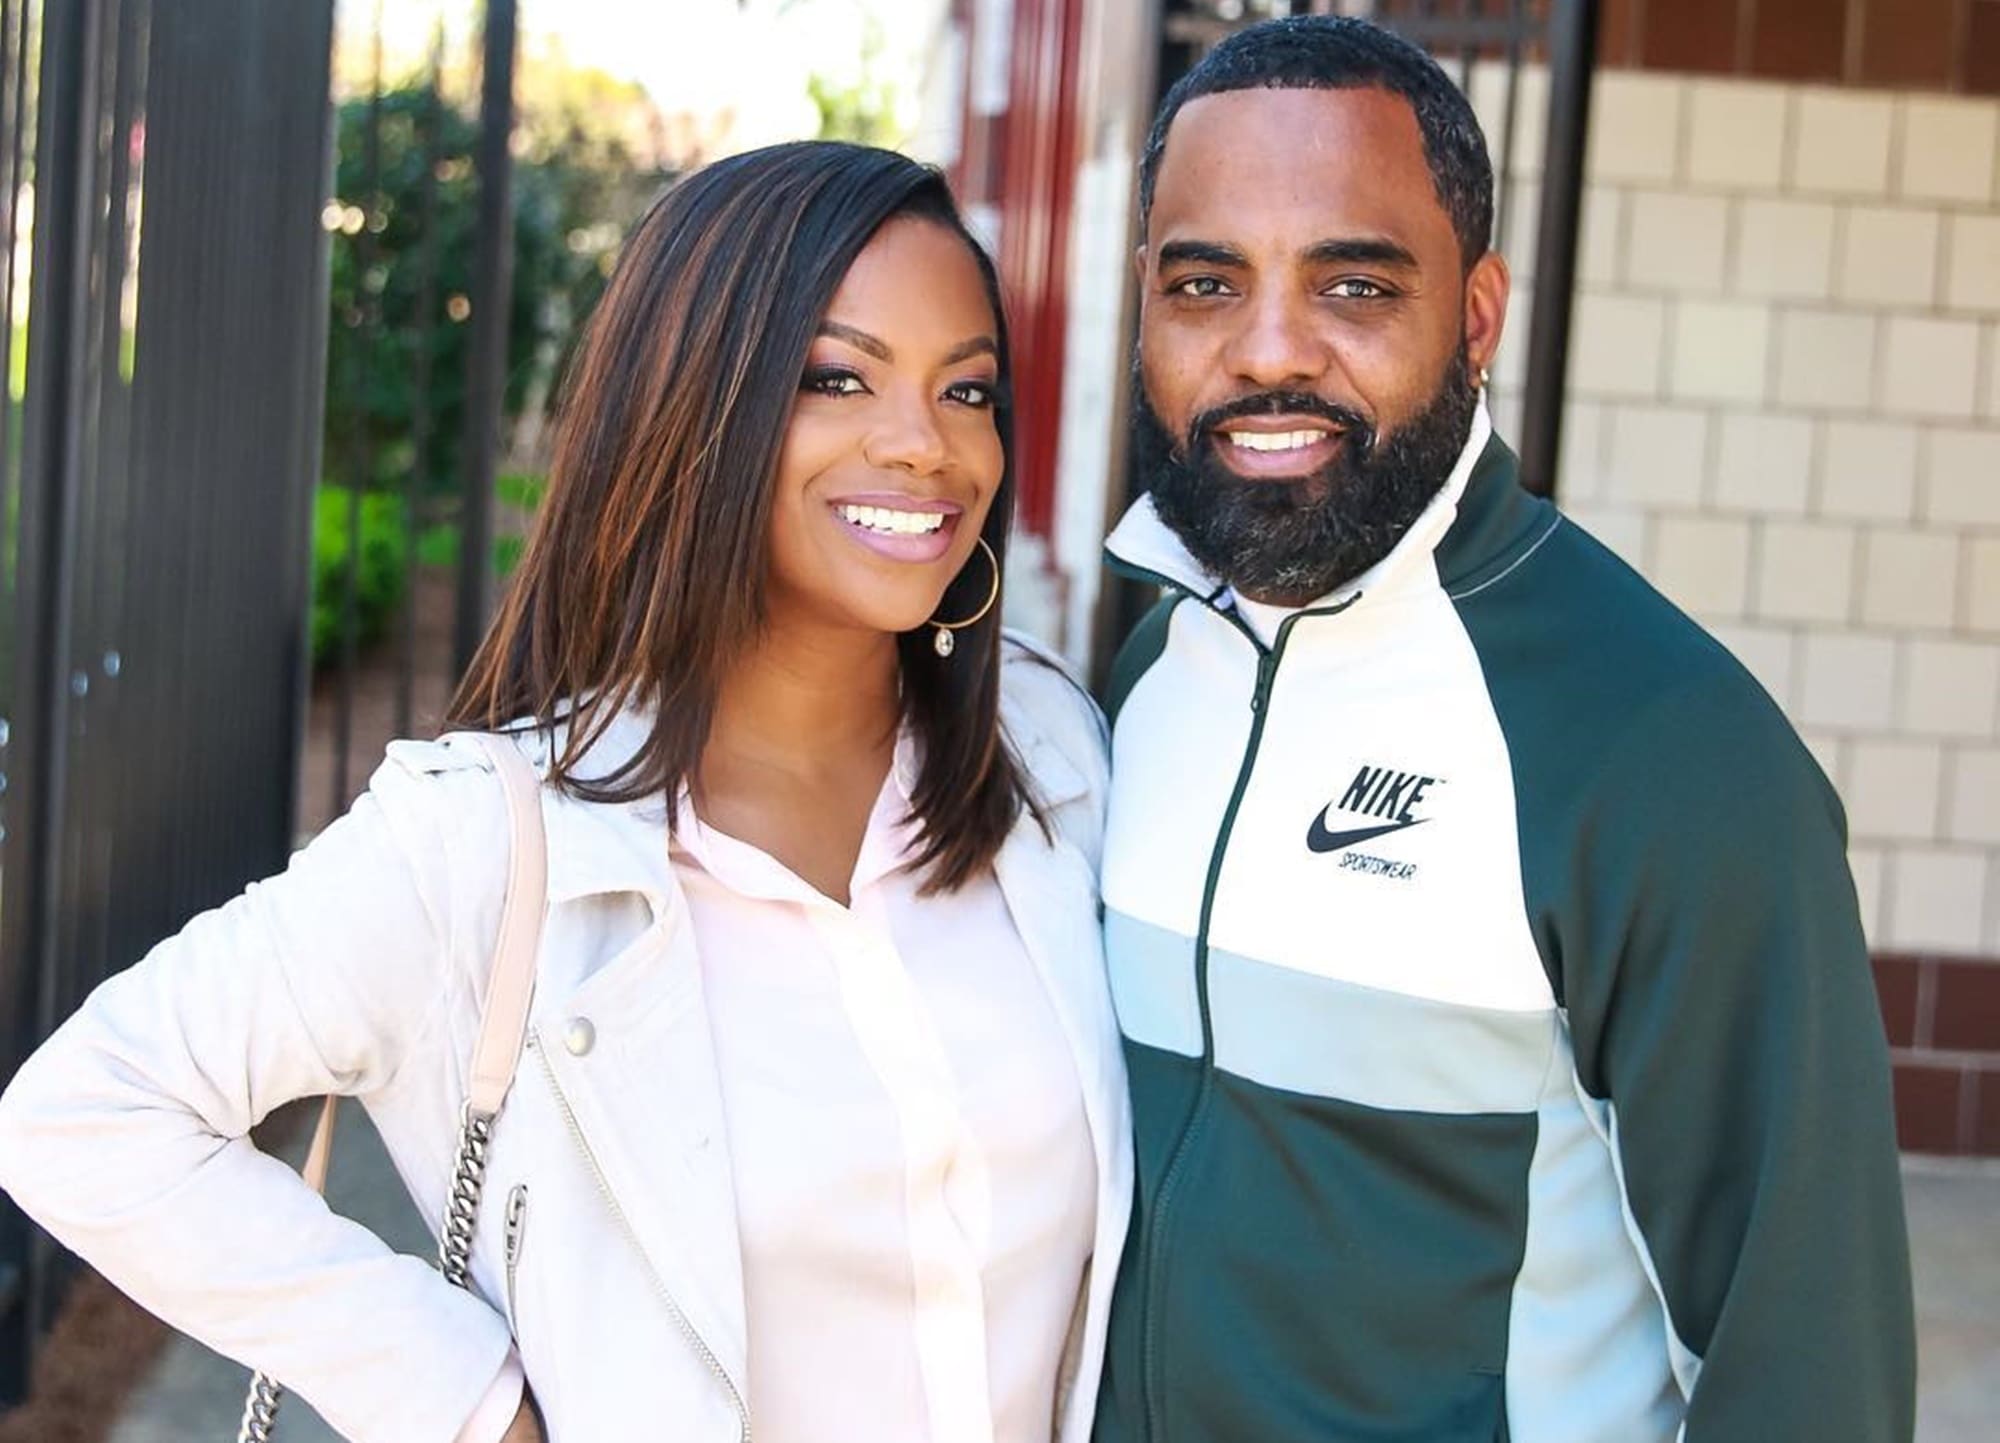 Todd Tucker Shares An Amazing Photo With Kandi Burruss - Check Out Their Gorgeous Look